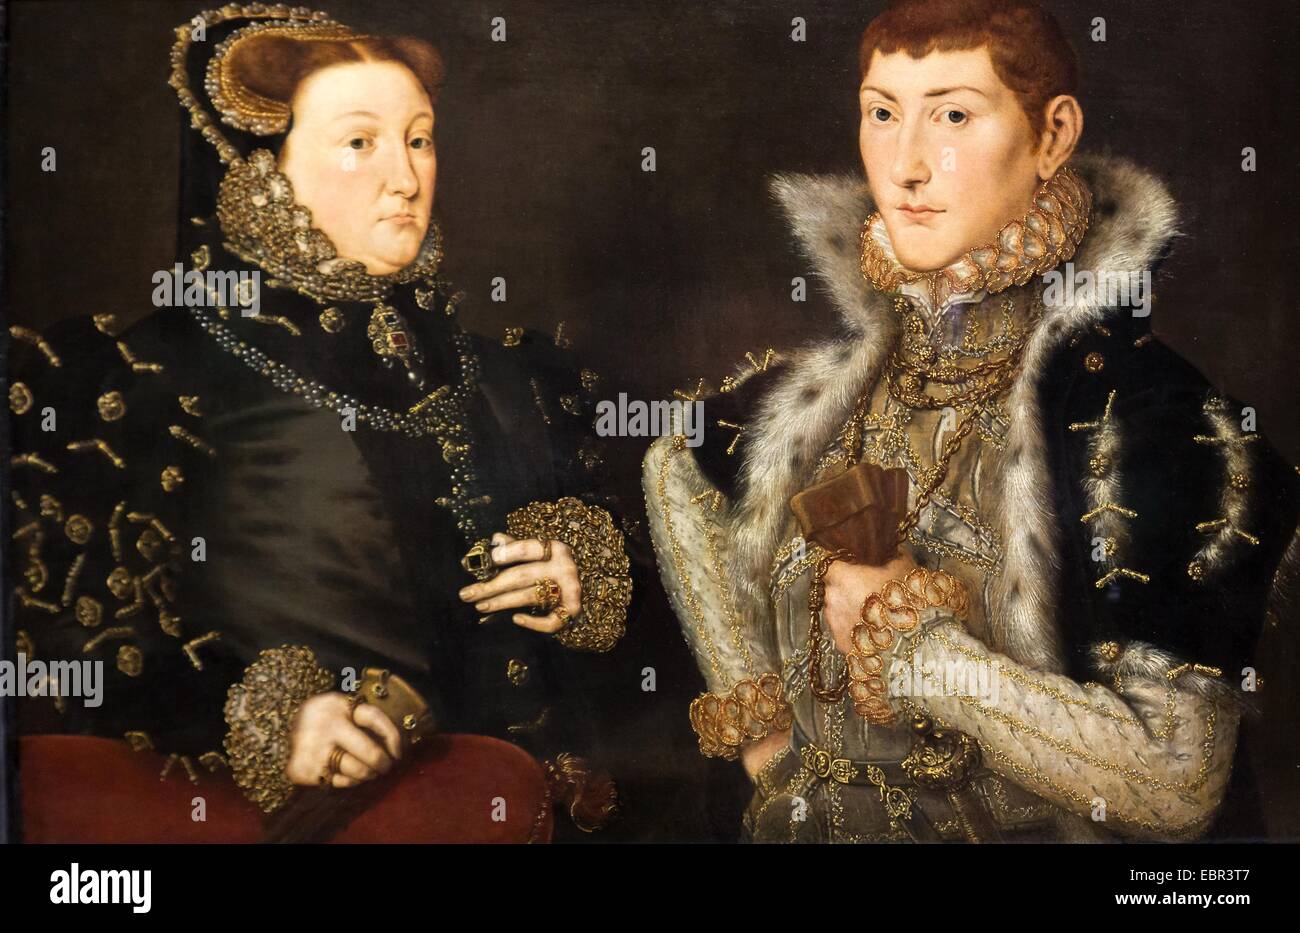 ActiveMuseum 0003642.jpg / Mary Neville, Lady Dacre and her son Gregory Fiennes, 10th Baron Dacre, 1559 - Hans Eworth 22/01/2014  -   / 16th century Collection / Active Museum Stock Photo